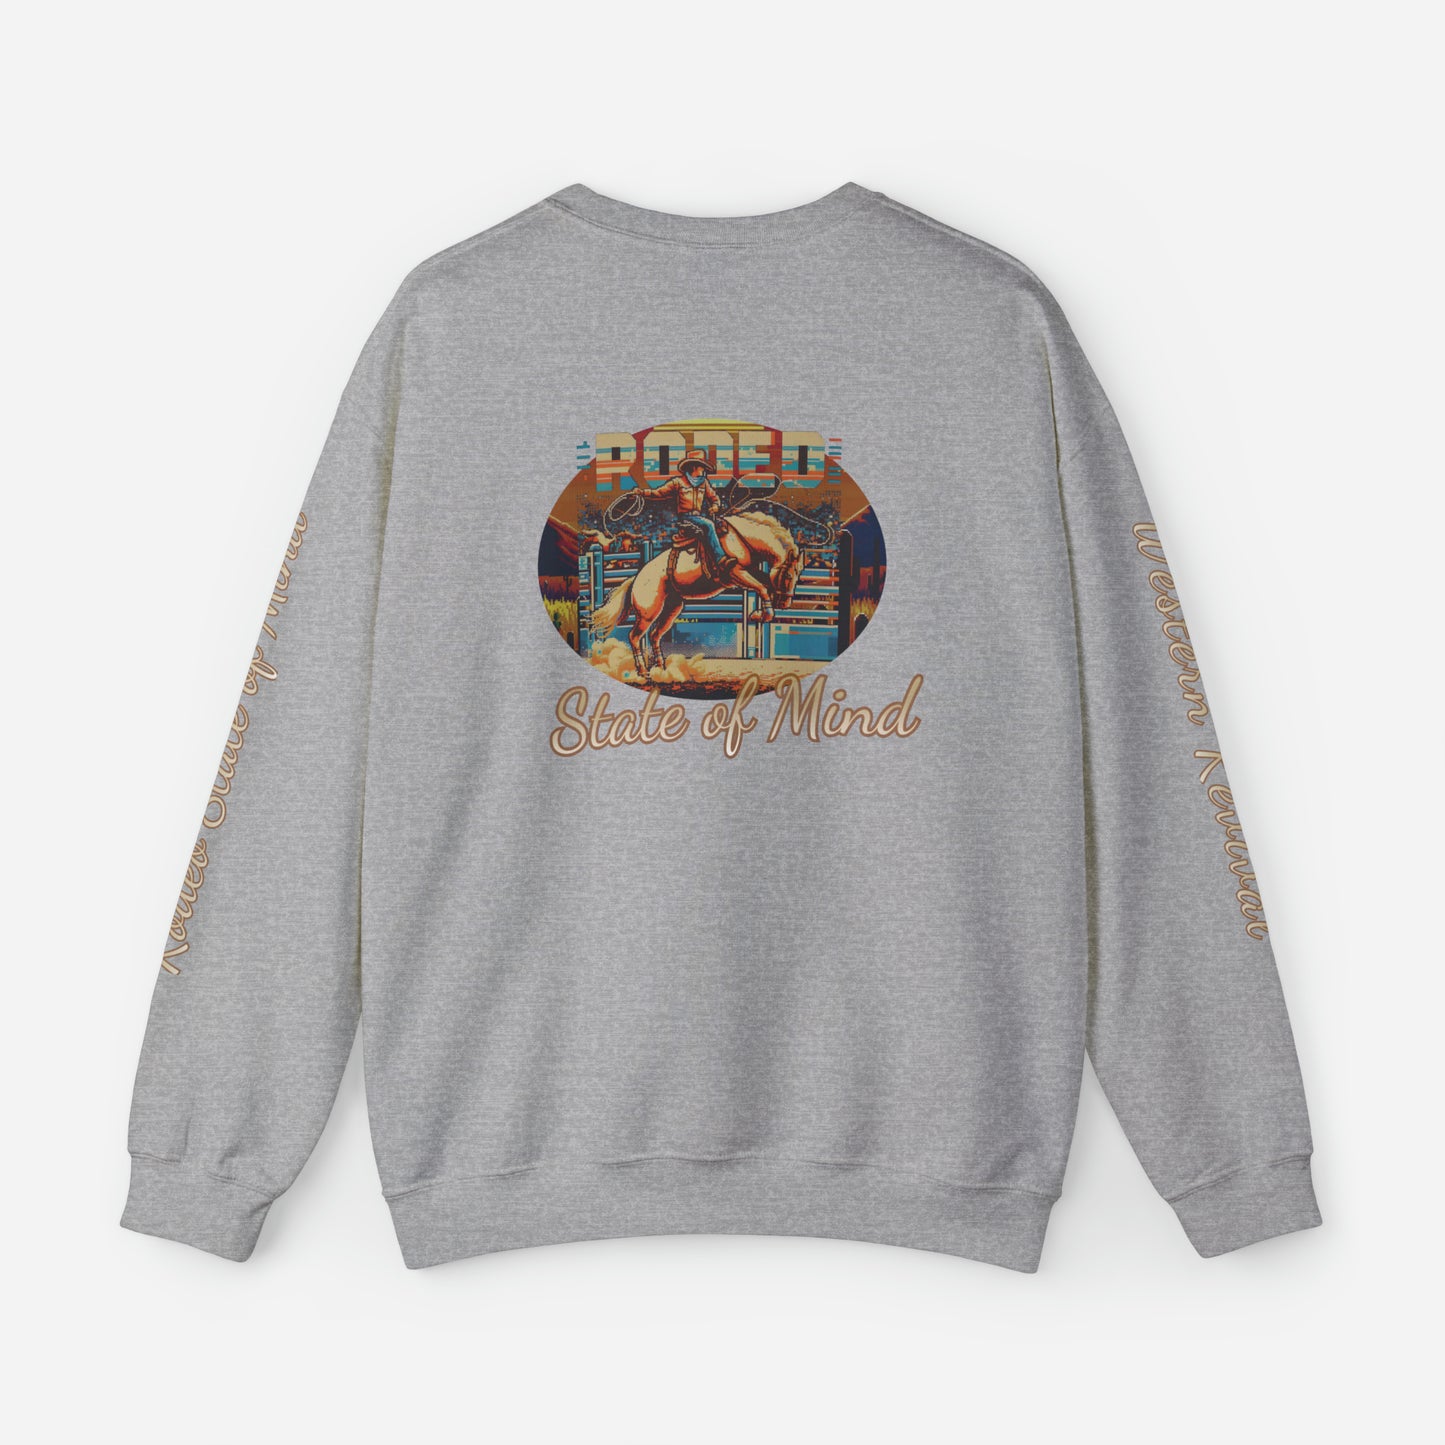 Rodeo State of Mind - Sweater